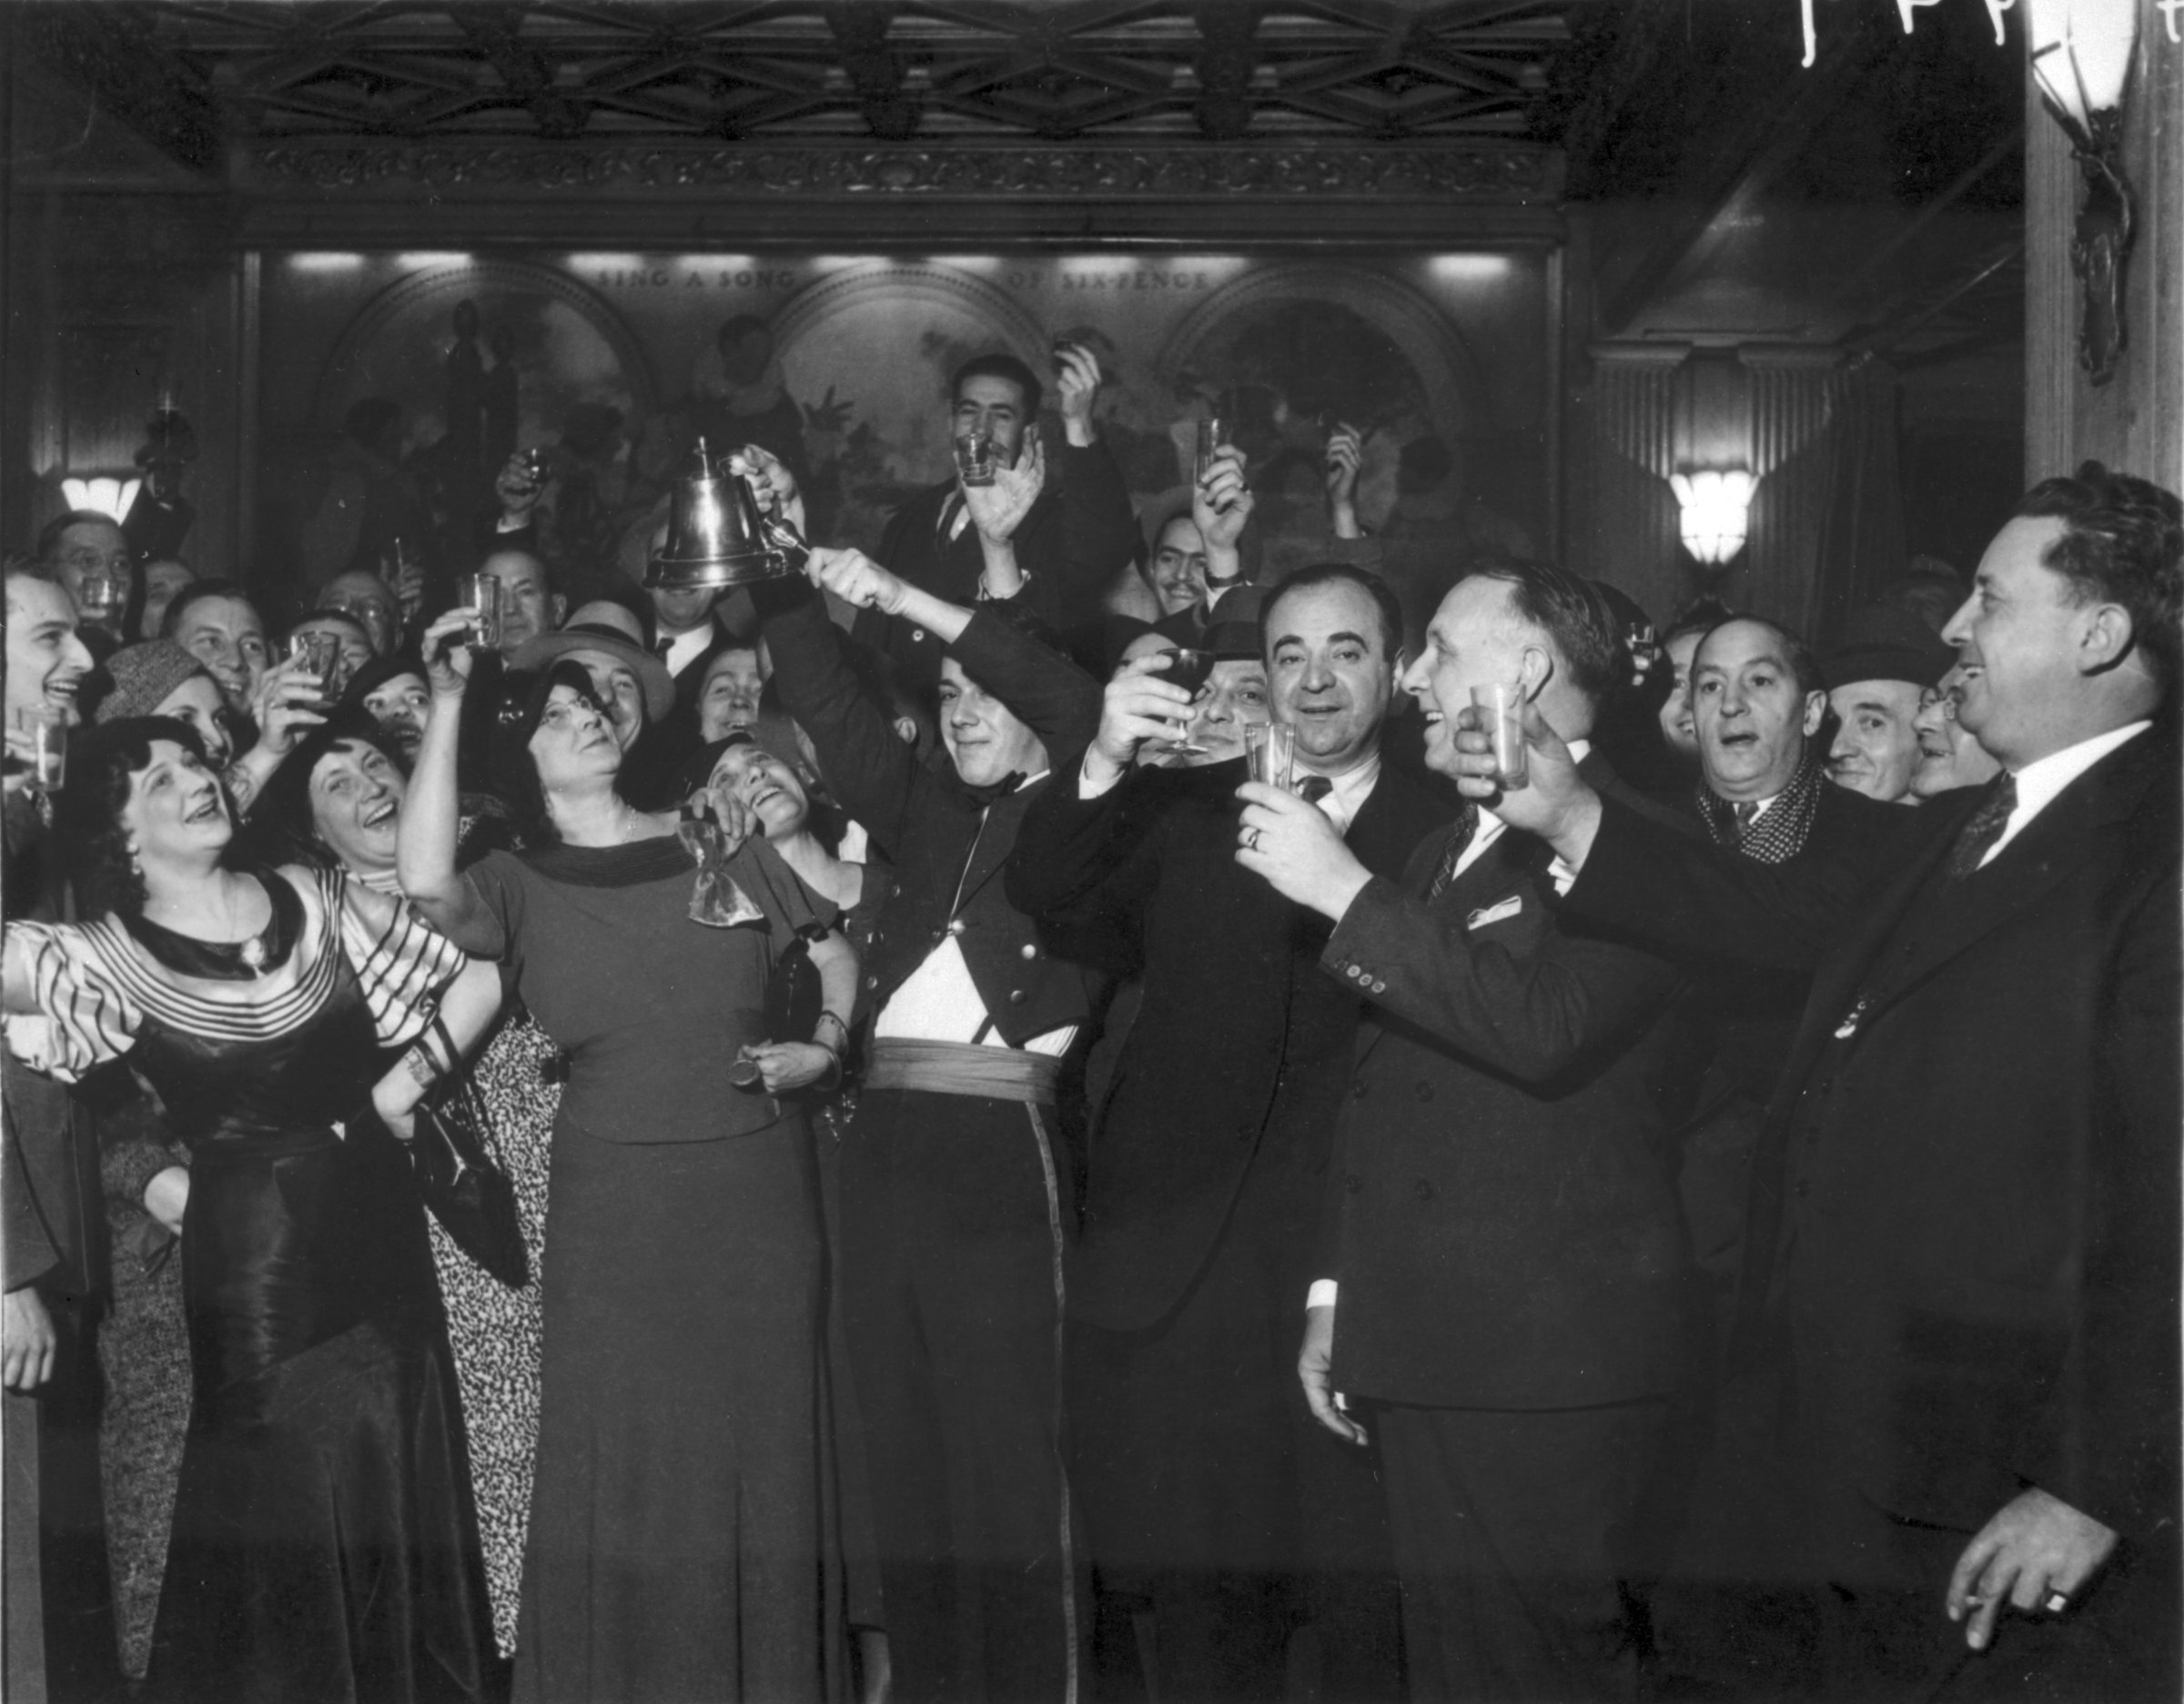 Men and women in a a bar raising glasses celebrating prohibition's end